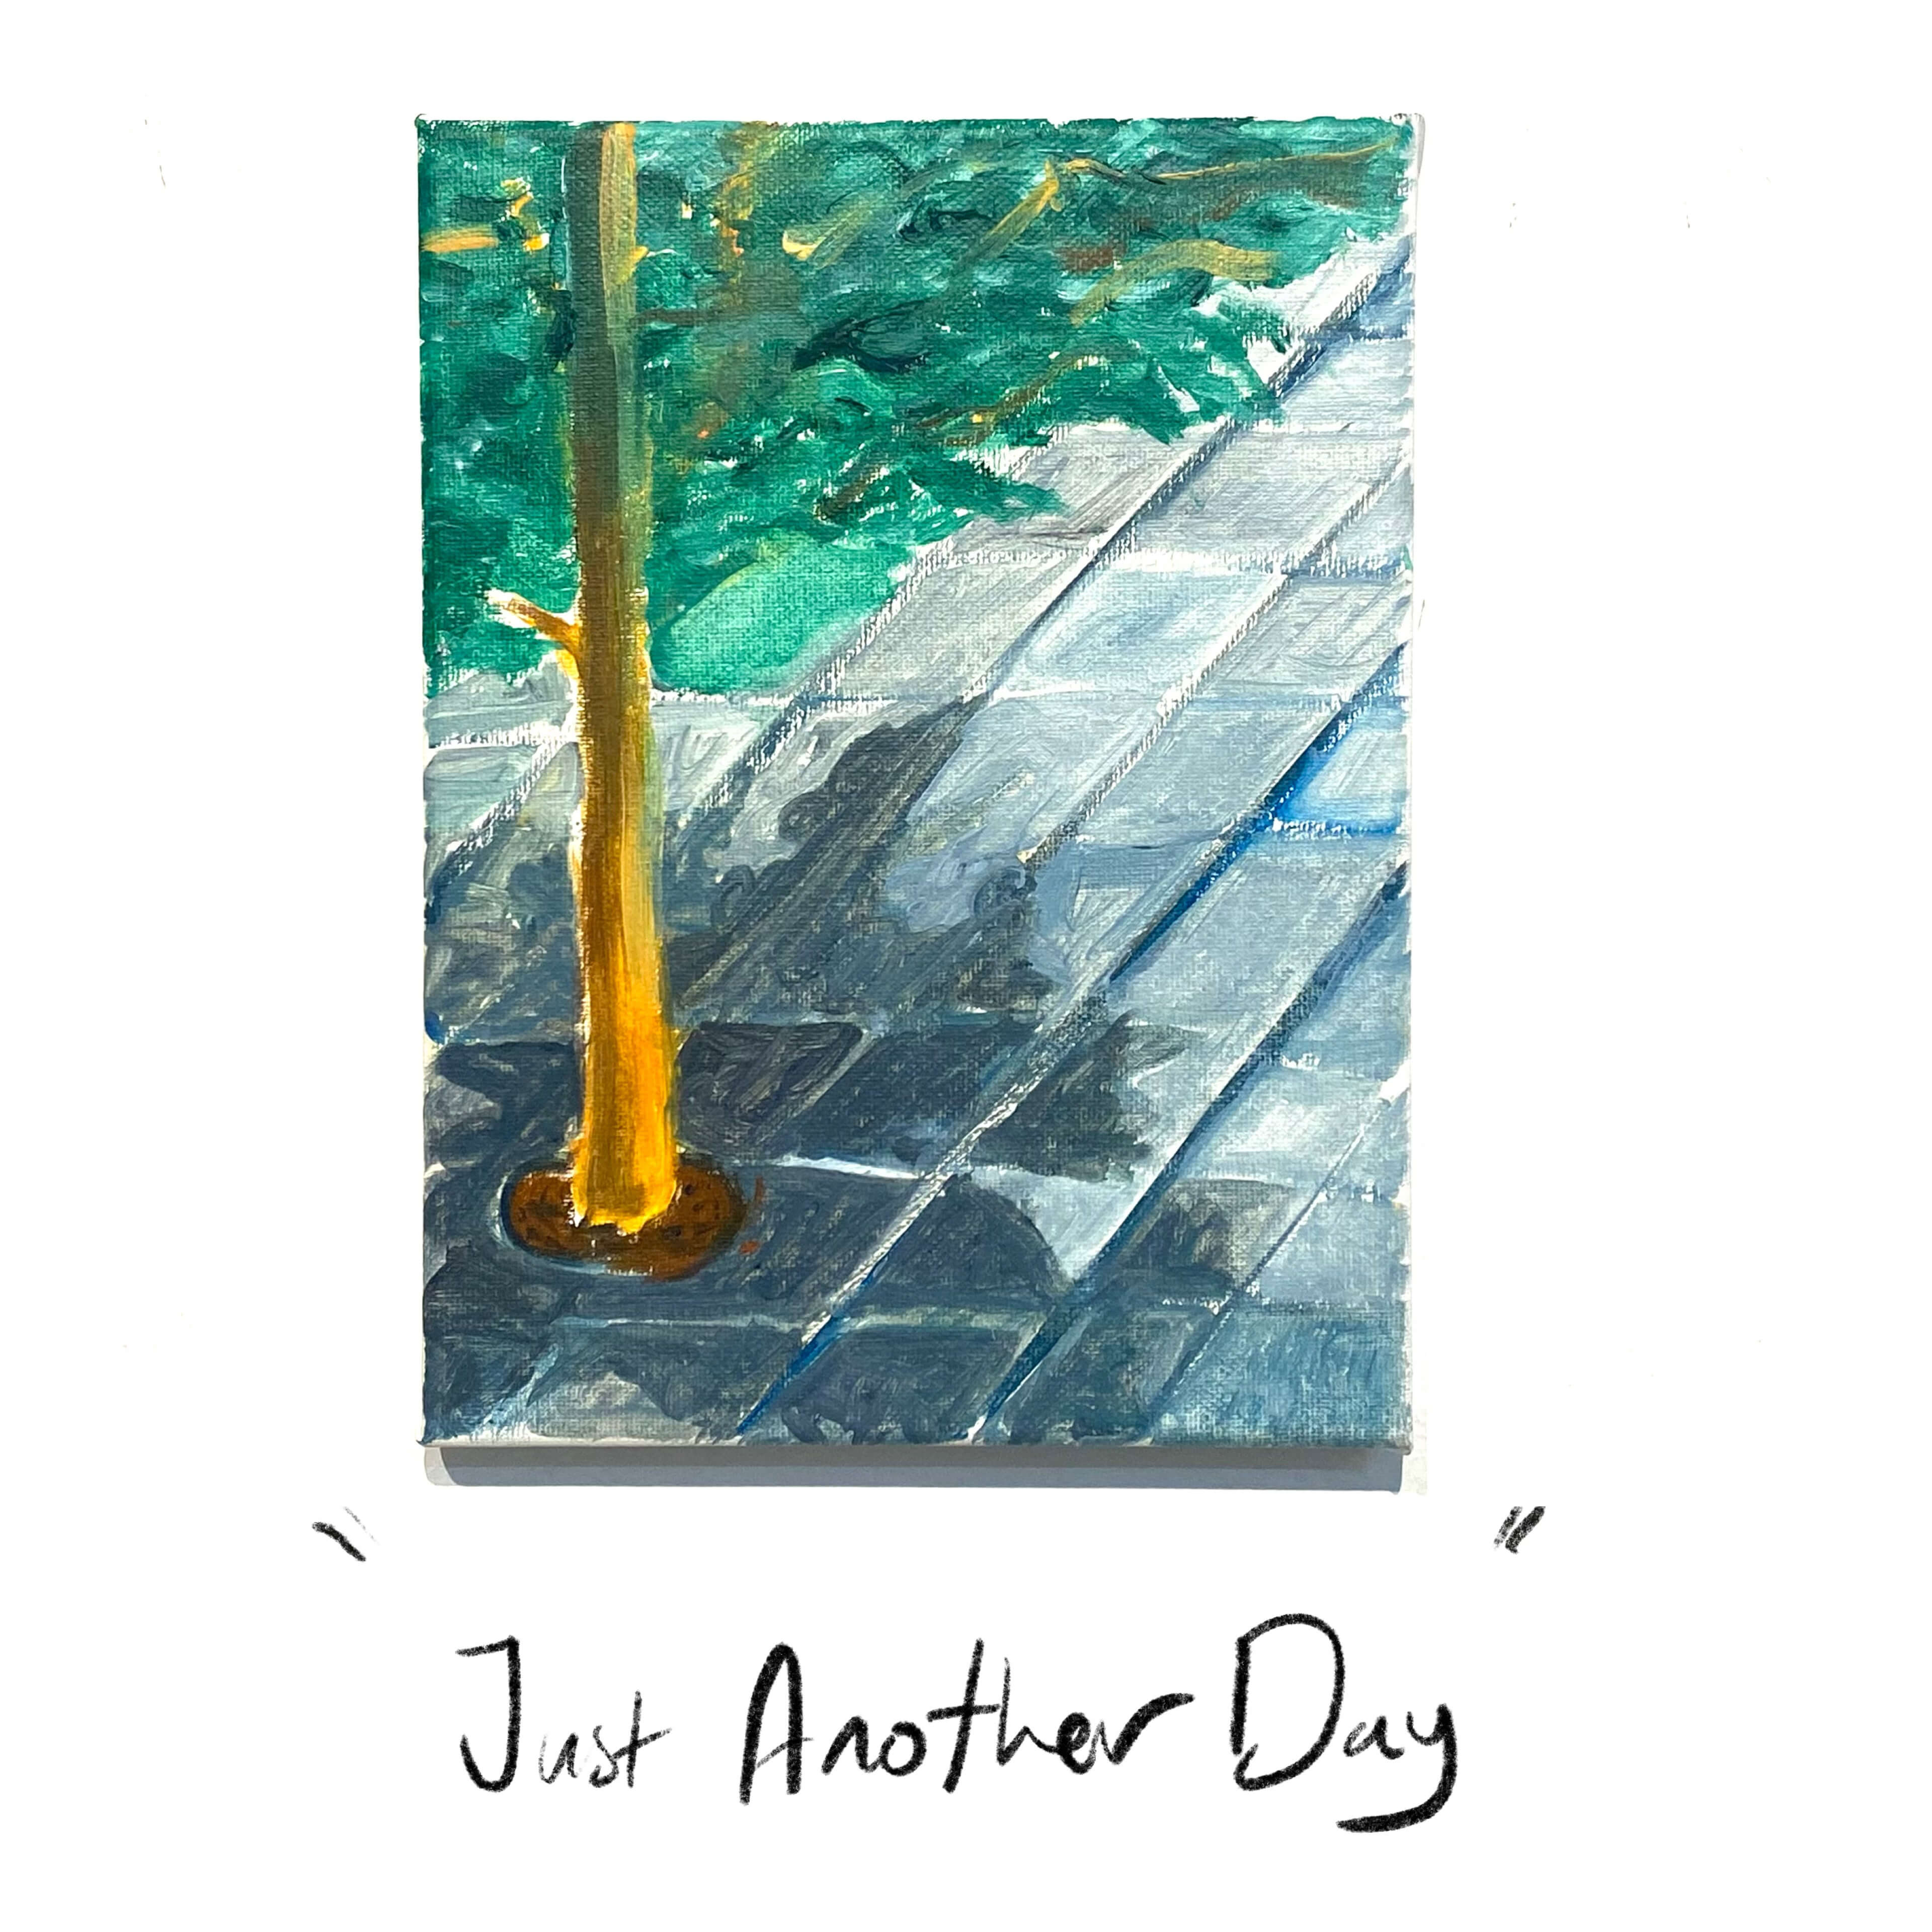 Just Another Day by Azad Daniel